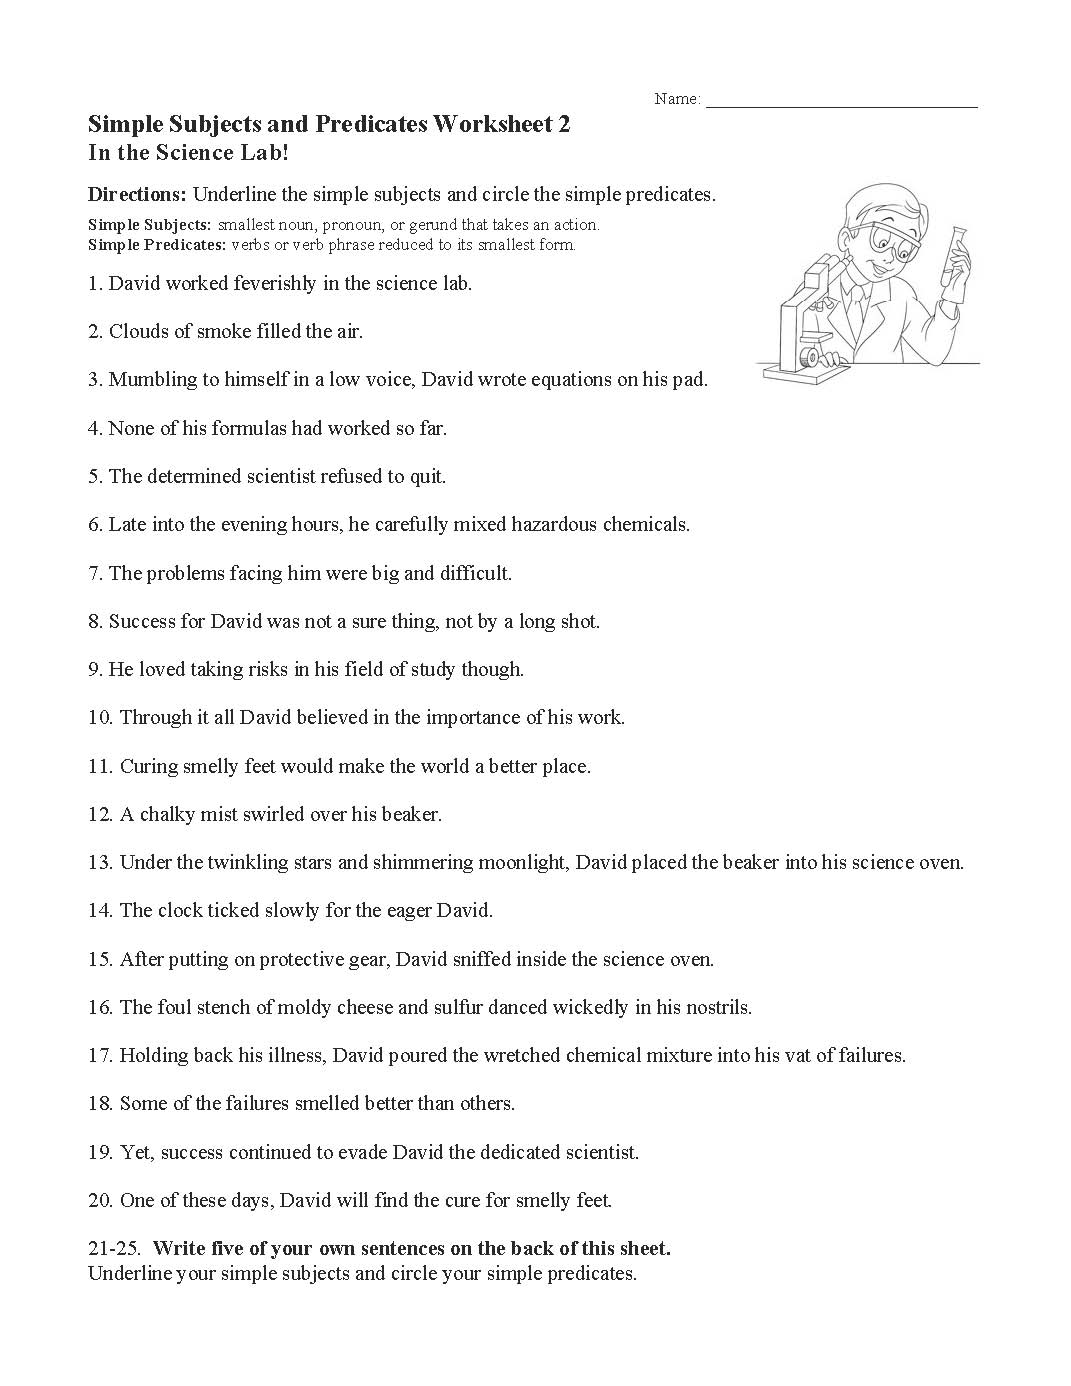 Simple Subjects And Predicates Worksheet 2 Preview